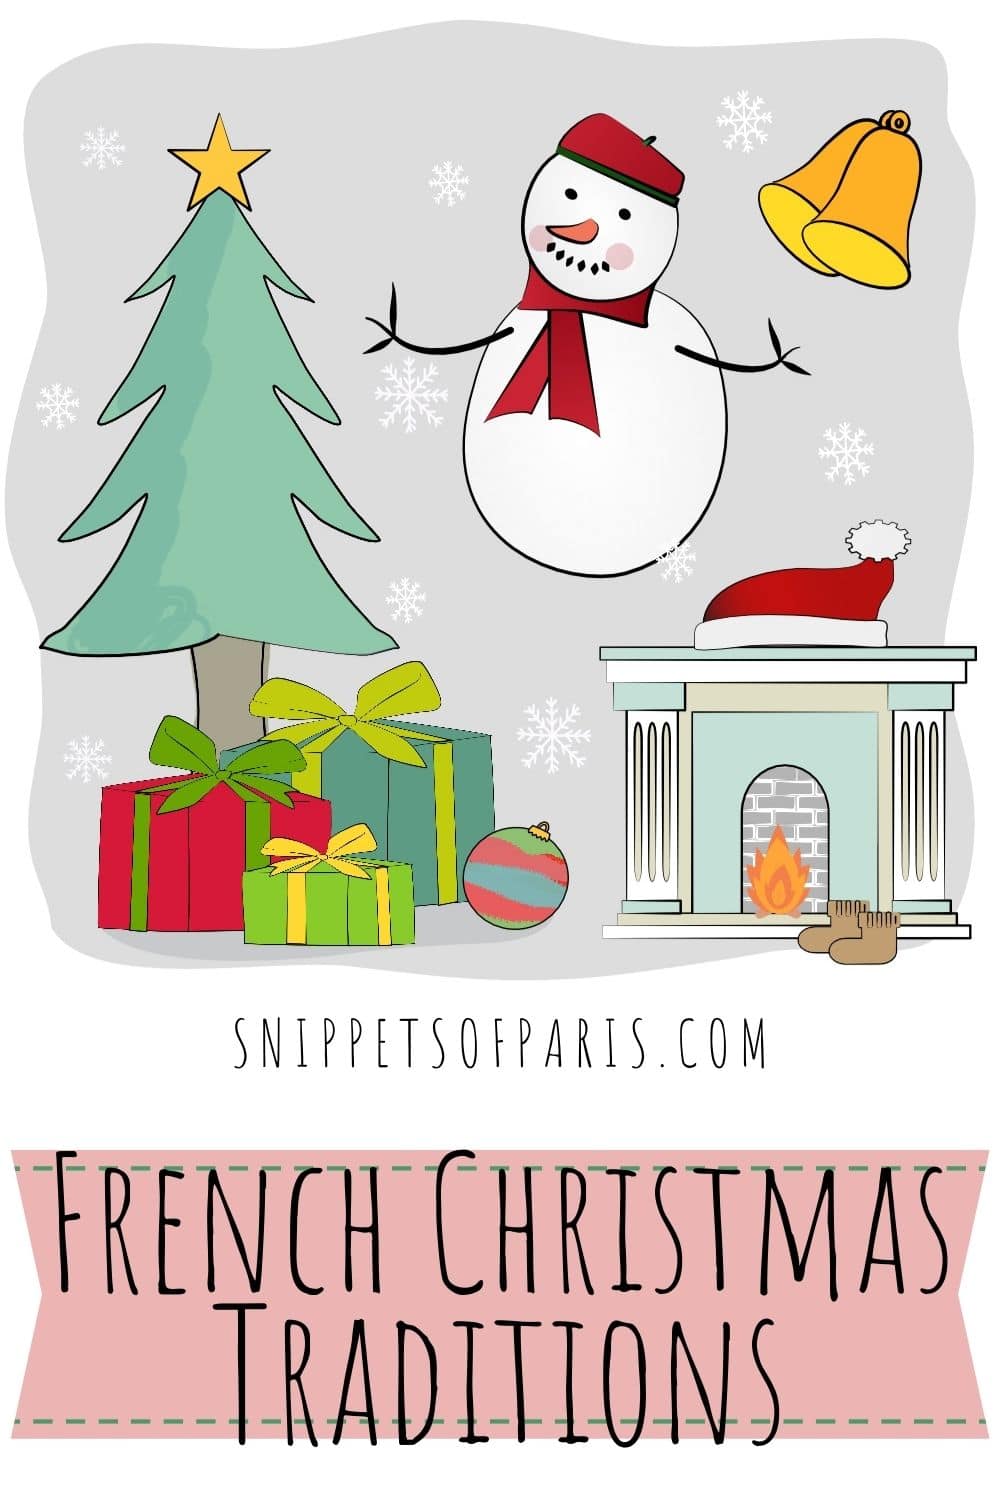 16 French Christmas traditions you will want to adopt